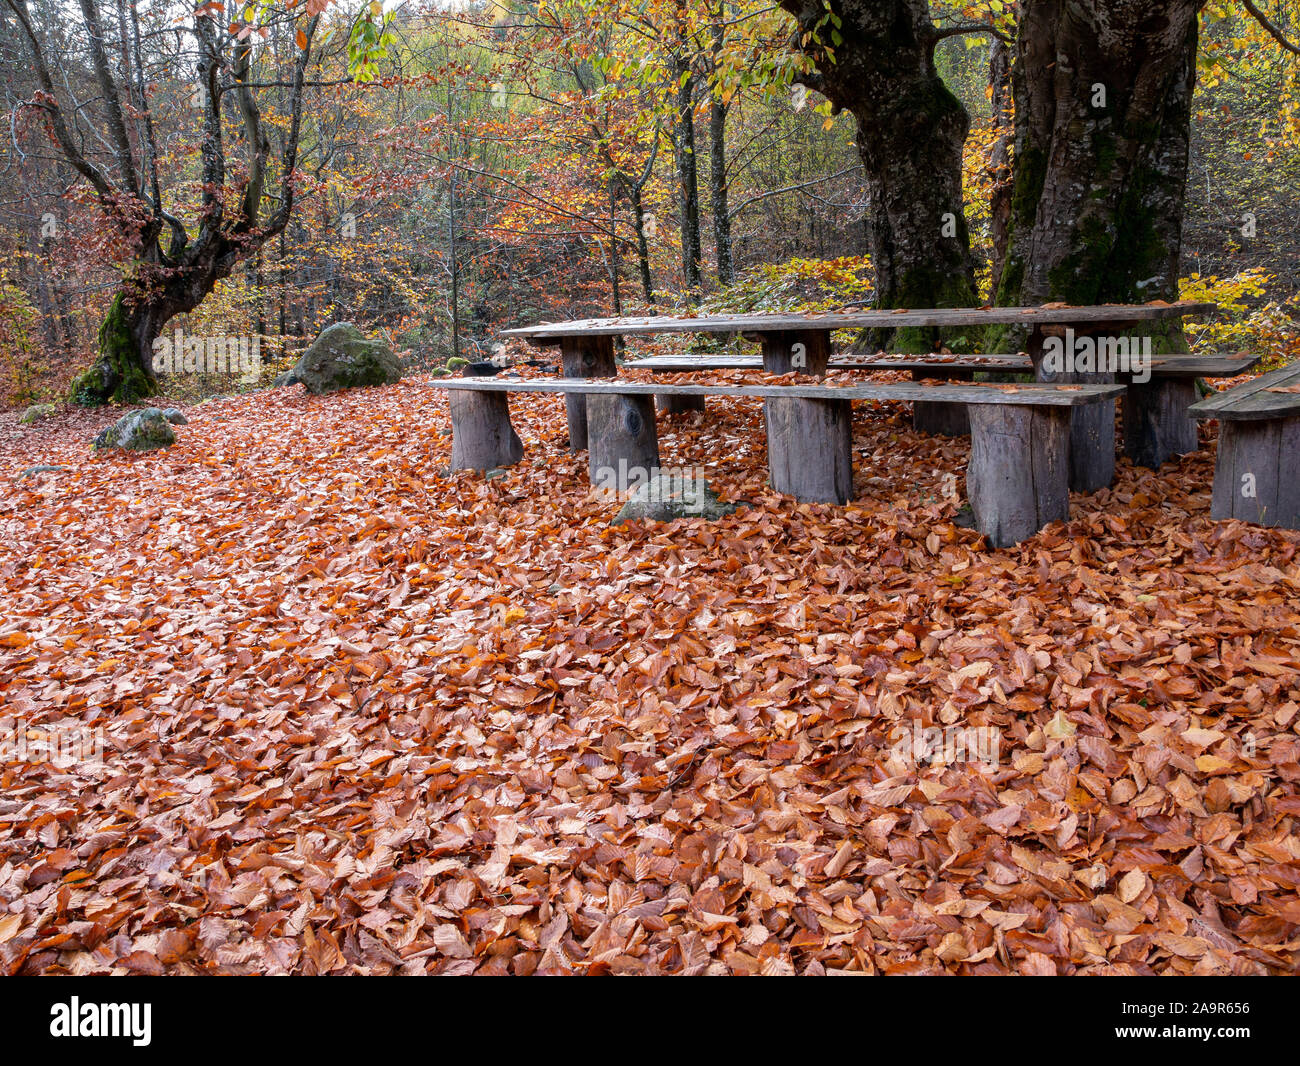 Picnic place in Stara Planina, Bulgaria. Autumn, November. Fallen leaves from centuries-old trees have covered the ground. Wooden primitive table and Stock Photo